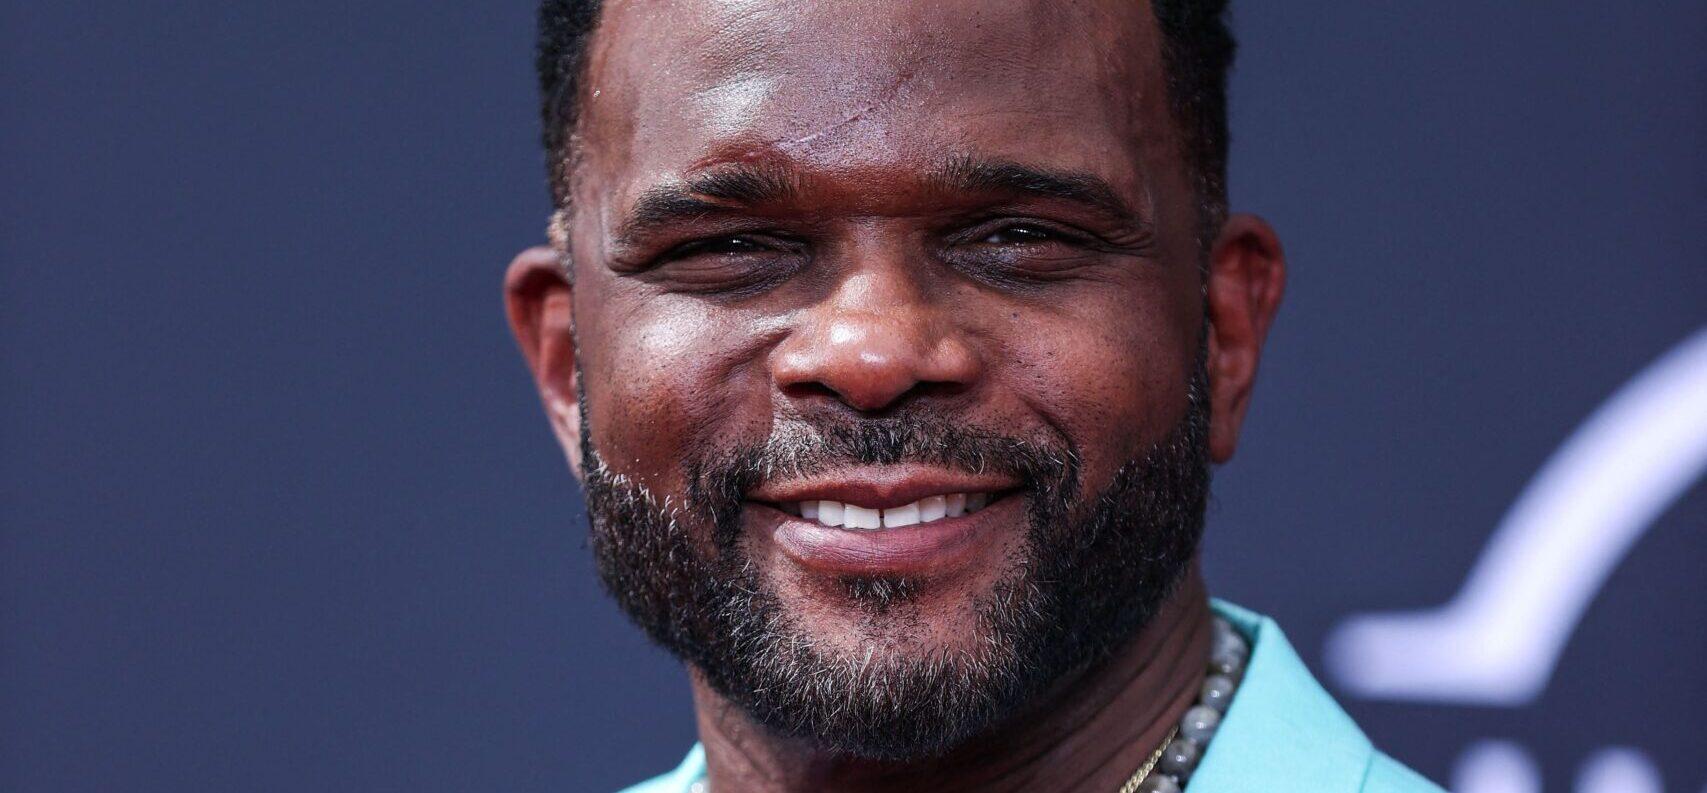 ‘Family Matters’ Star Darius McCrary Arrested Over Unpaid Child Support Again